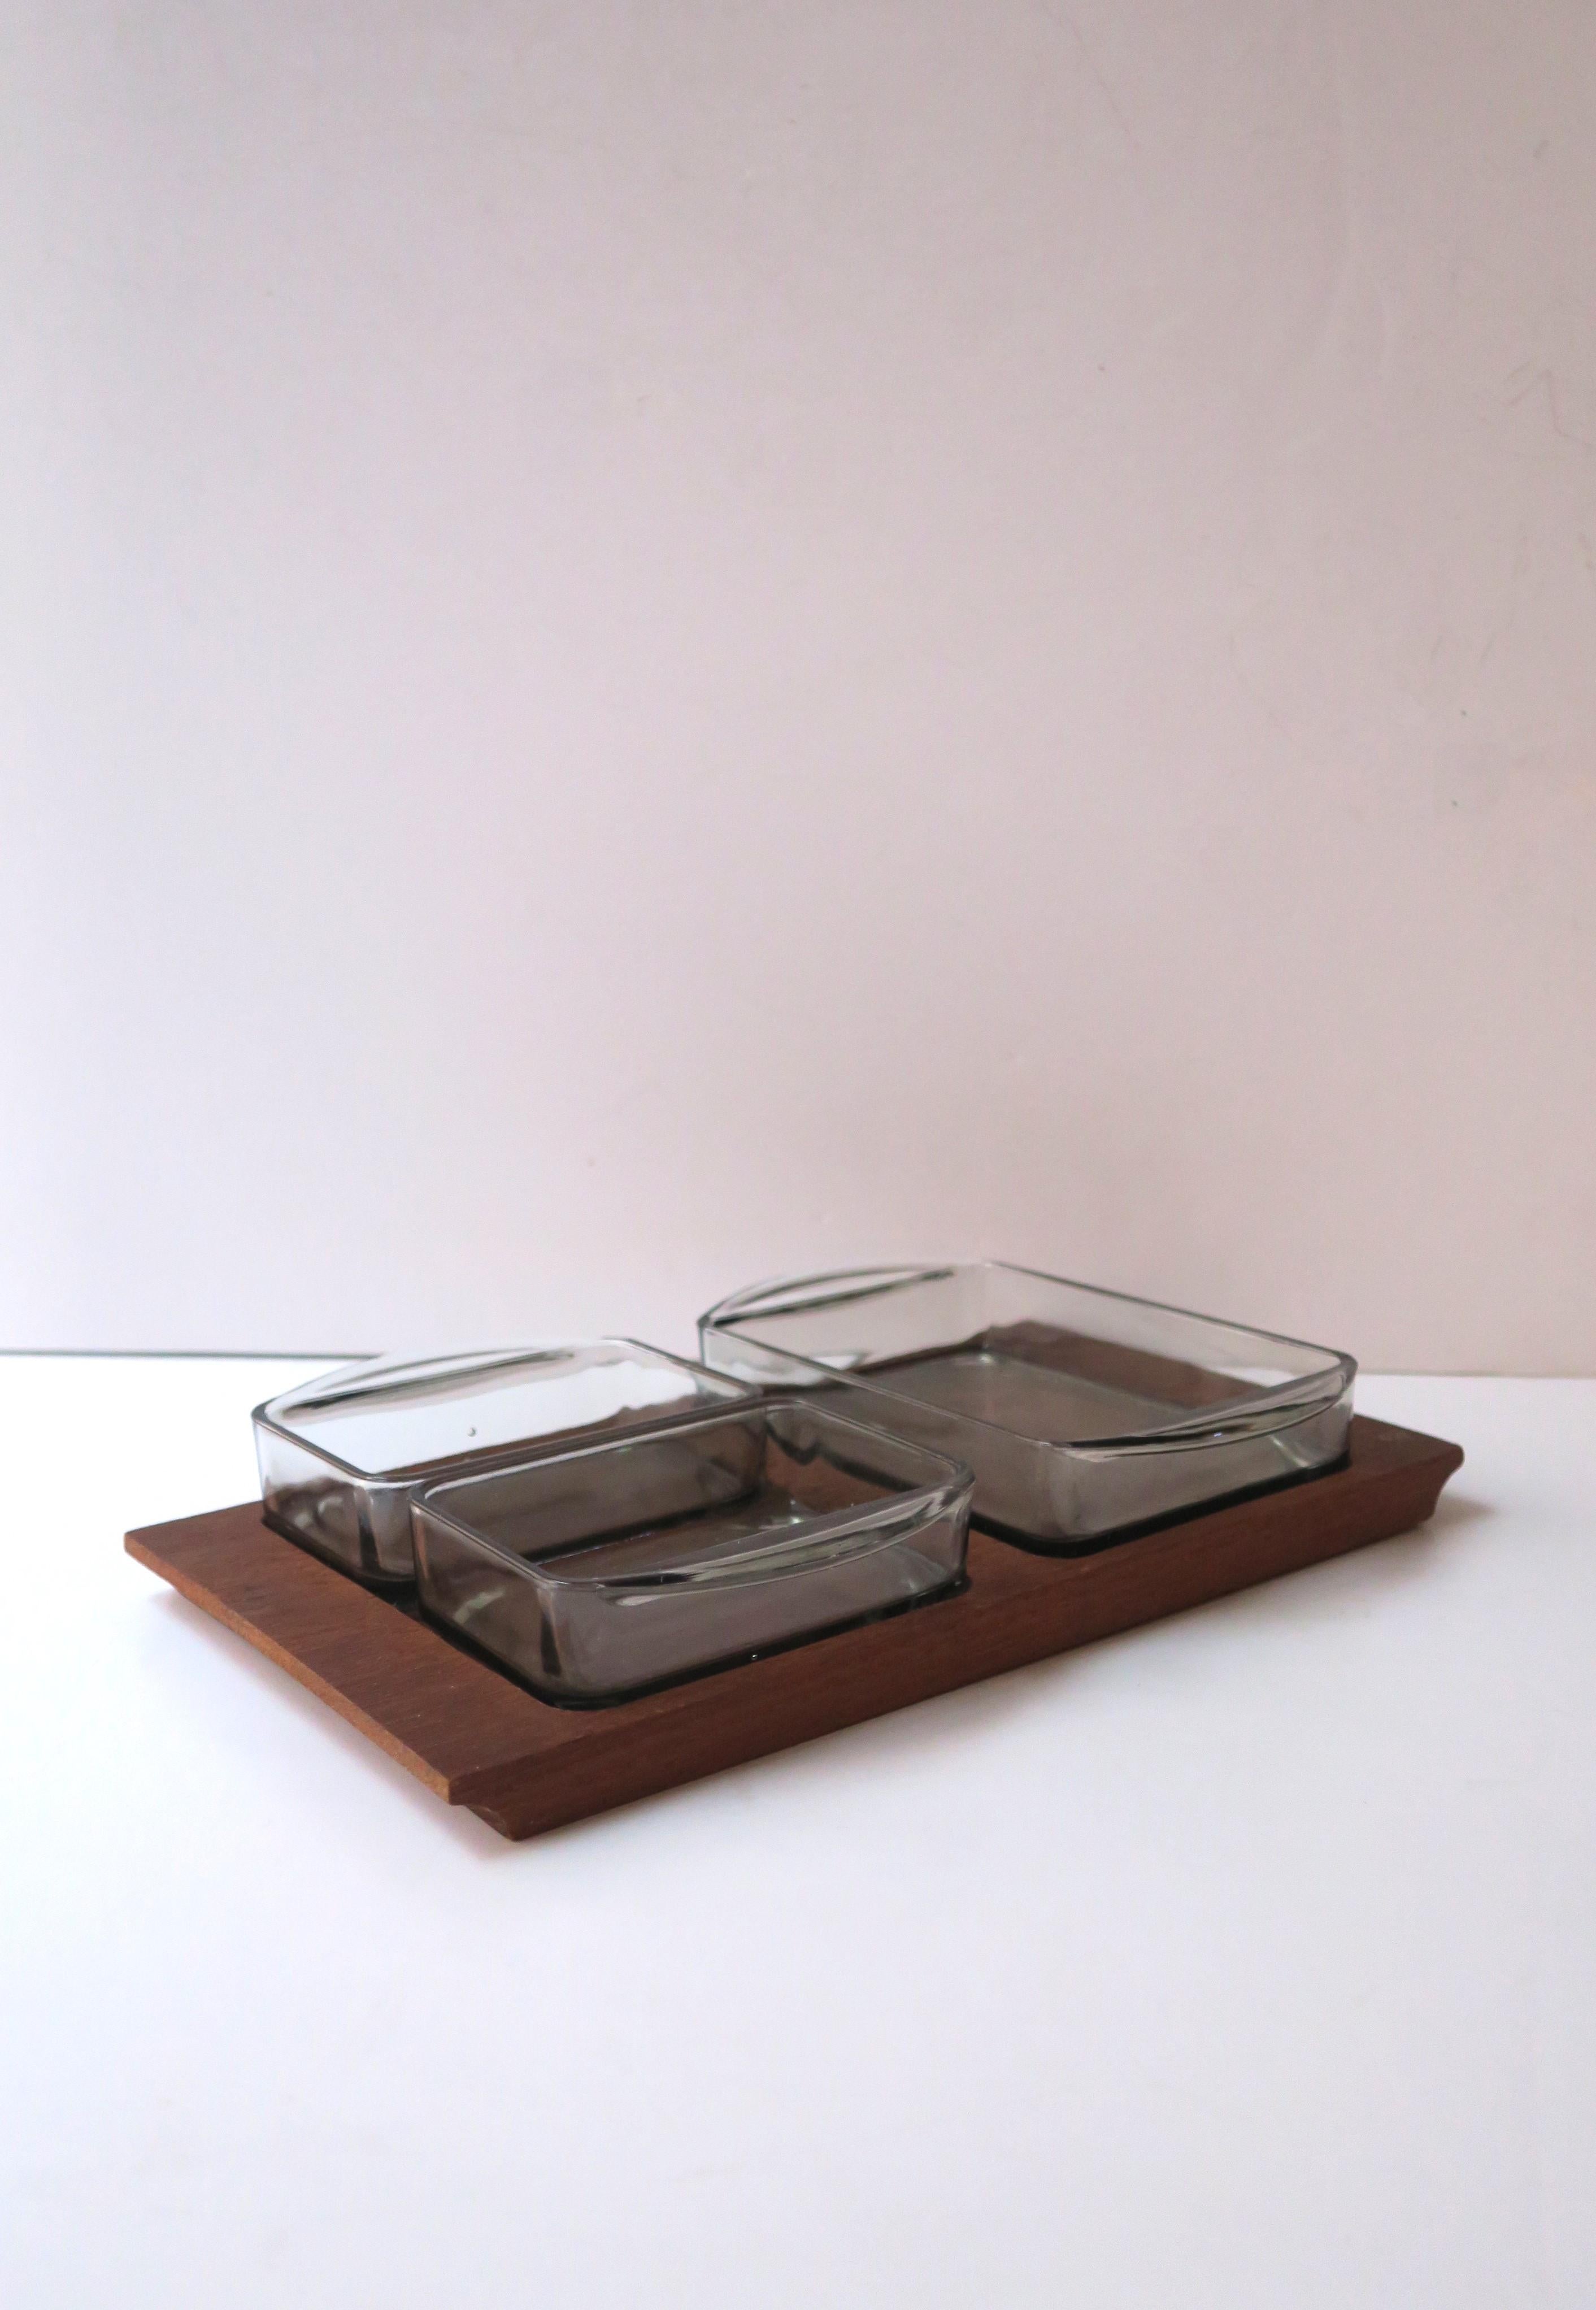 Midcentury Scandinavian Danish Modern Serving Dish  In Good Condition For Sale In New York, NY